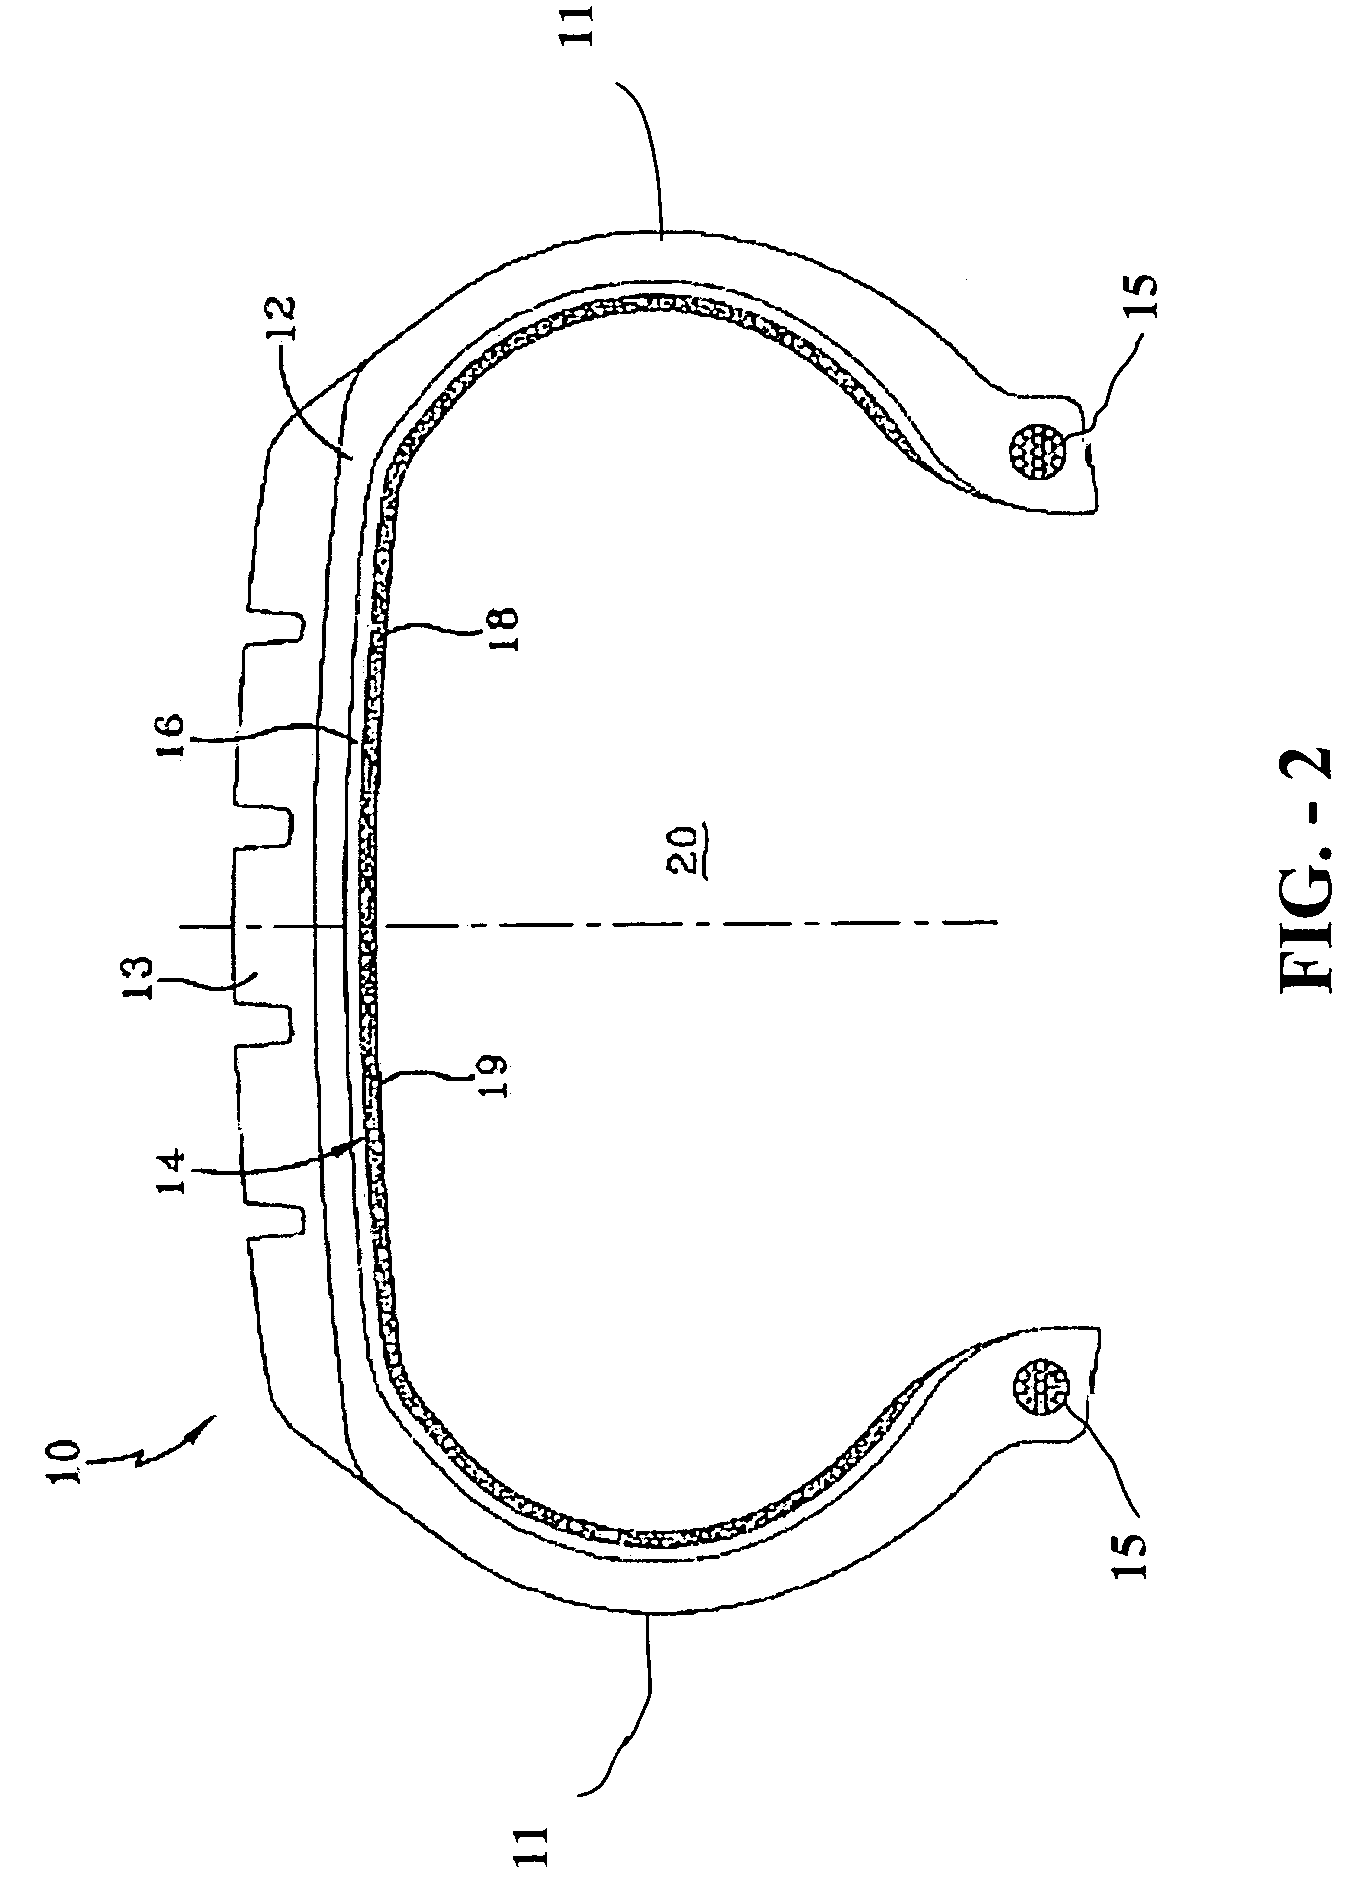 Tire with integral foamed noise damper